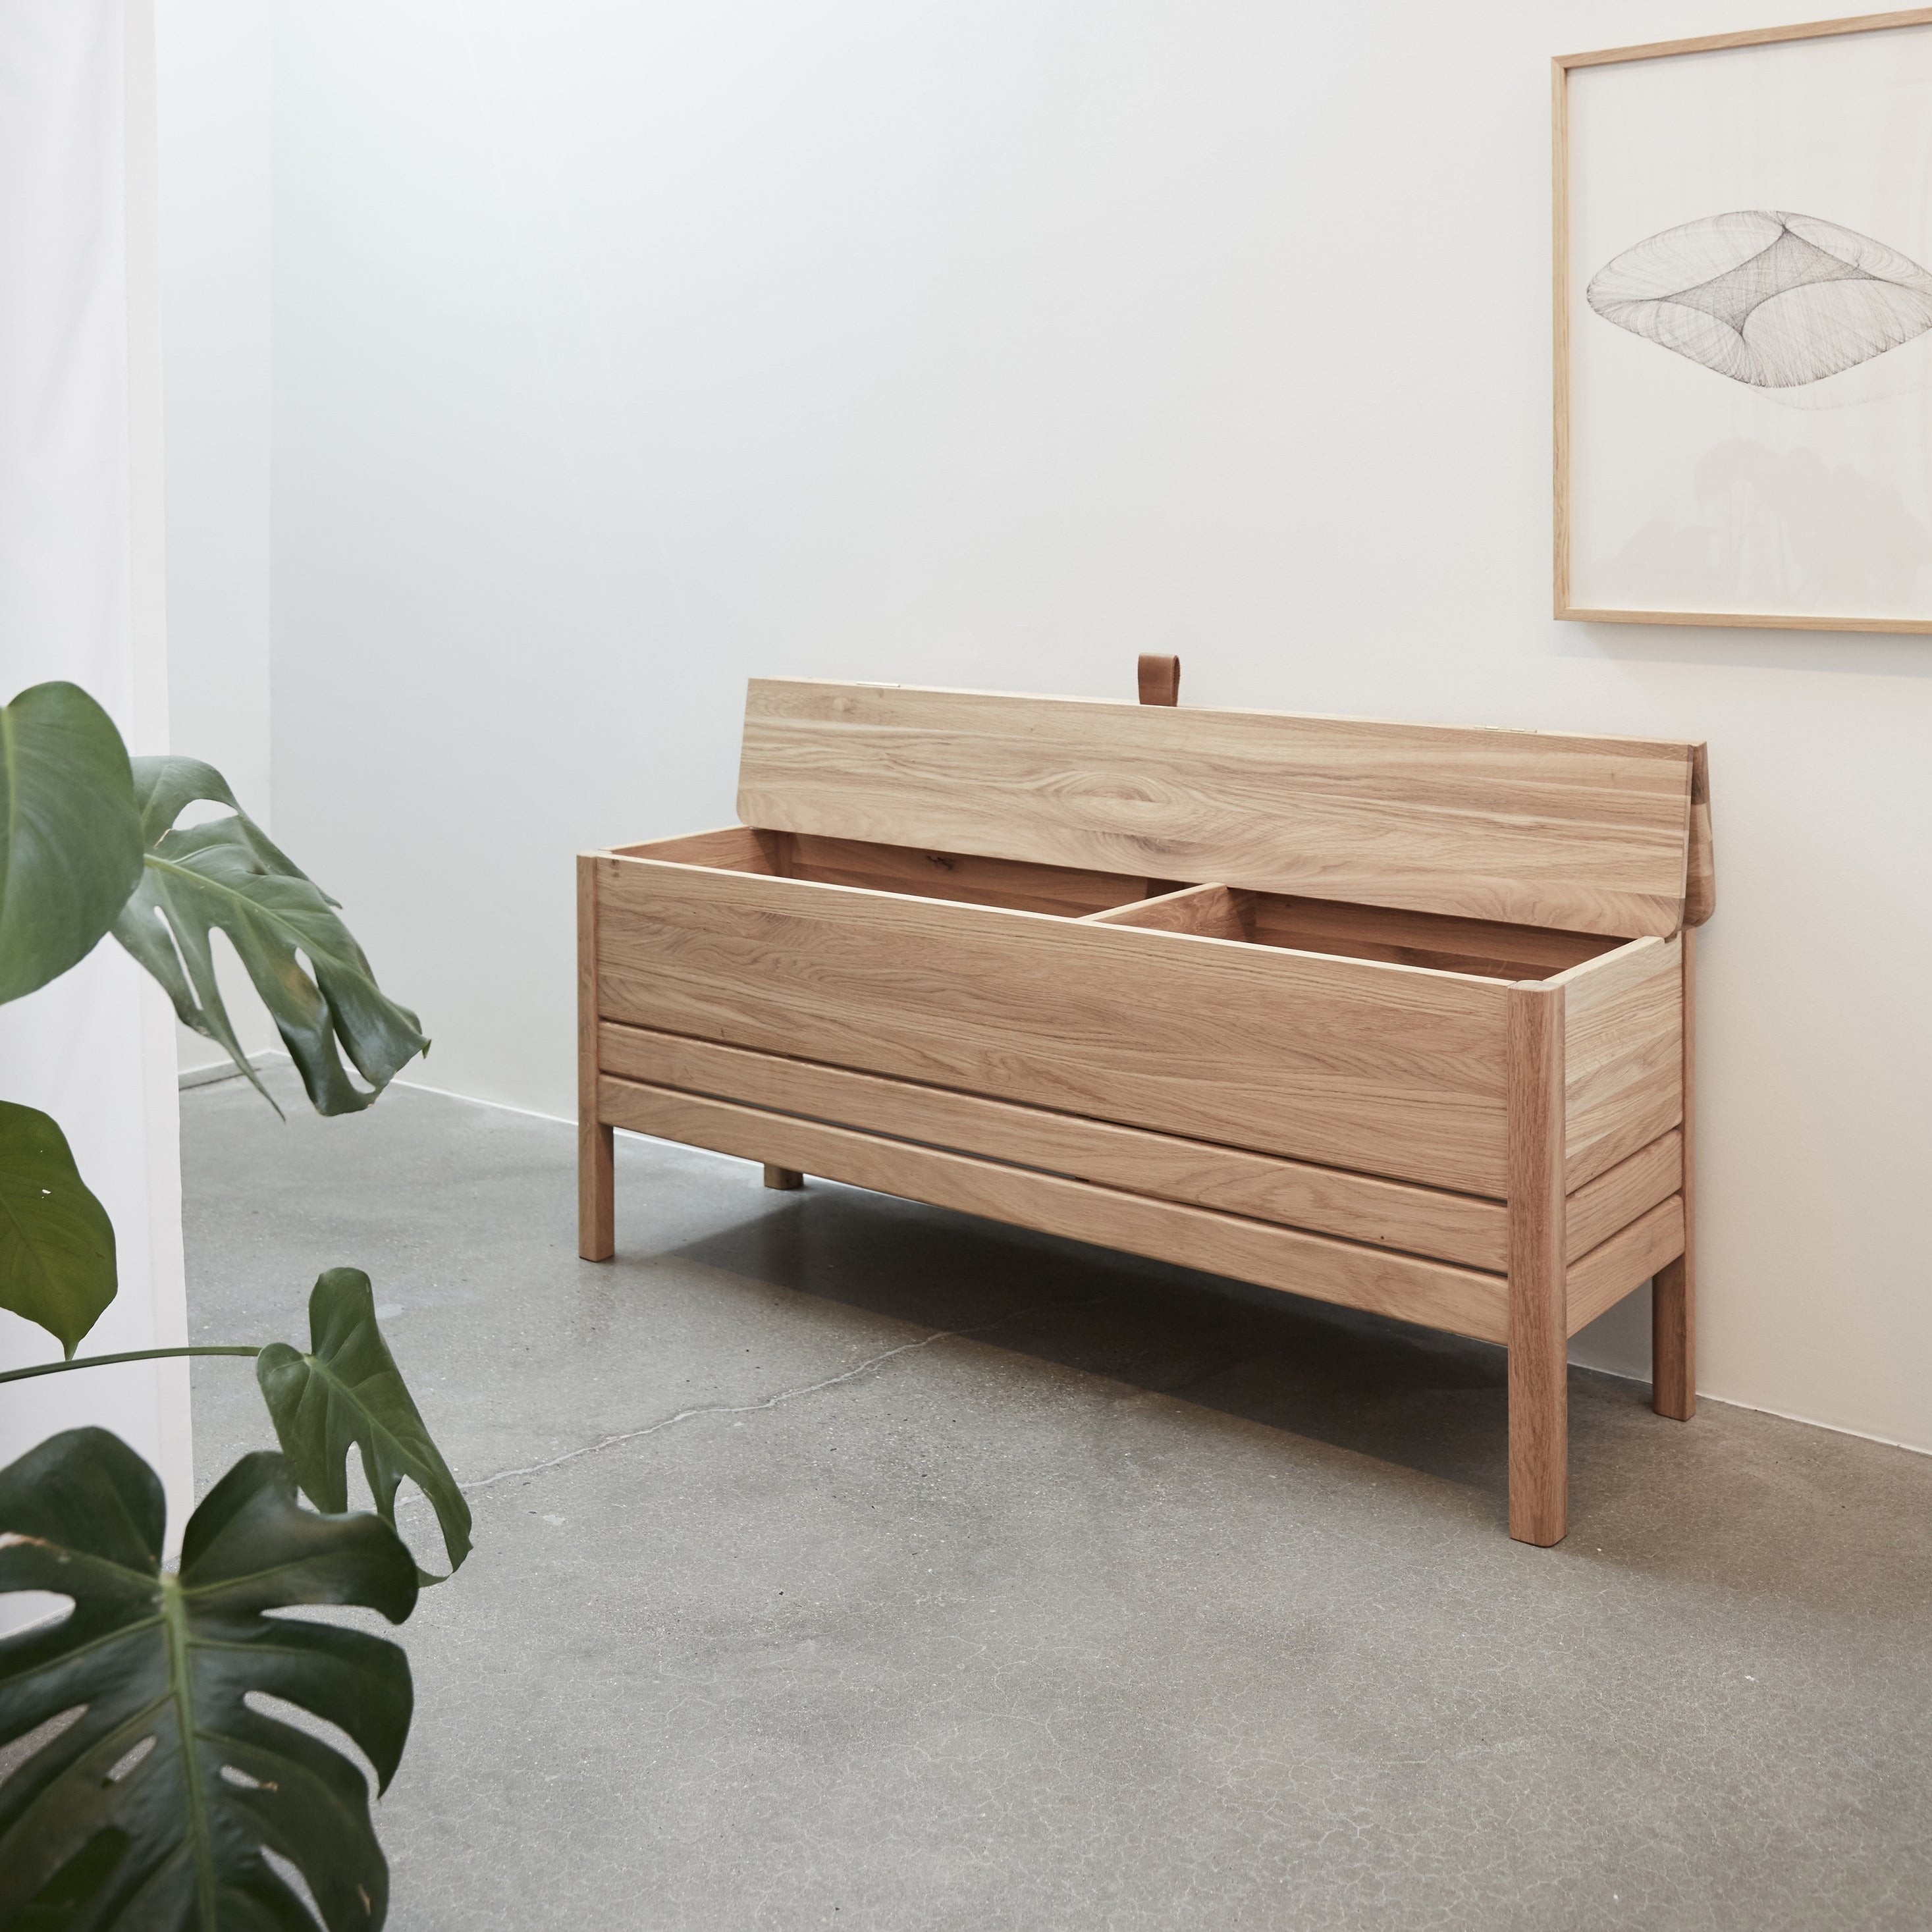 A LINE Storage Bench front interior view of natural finish